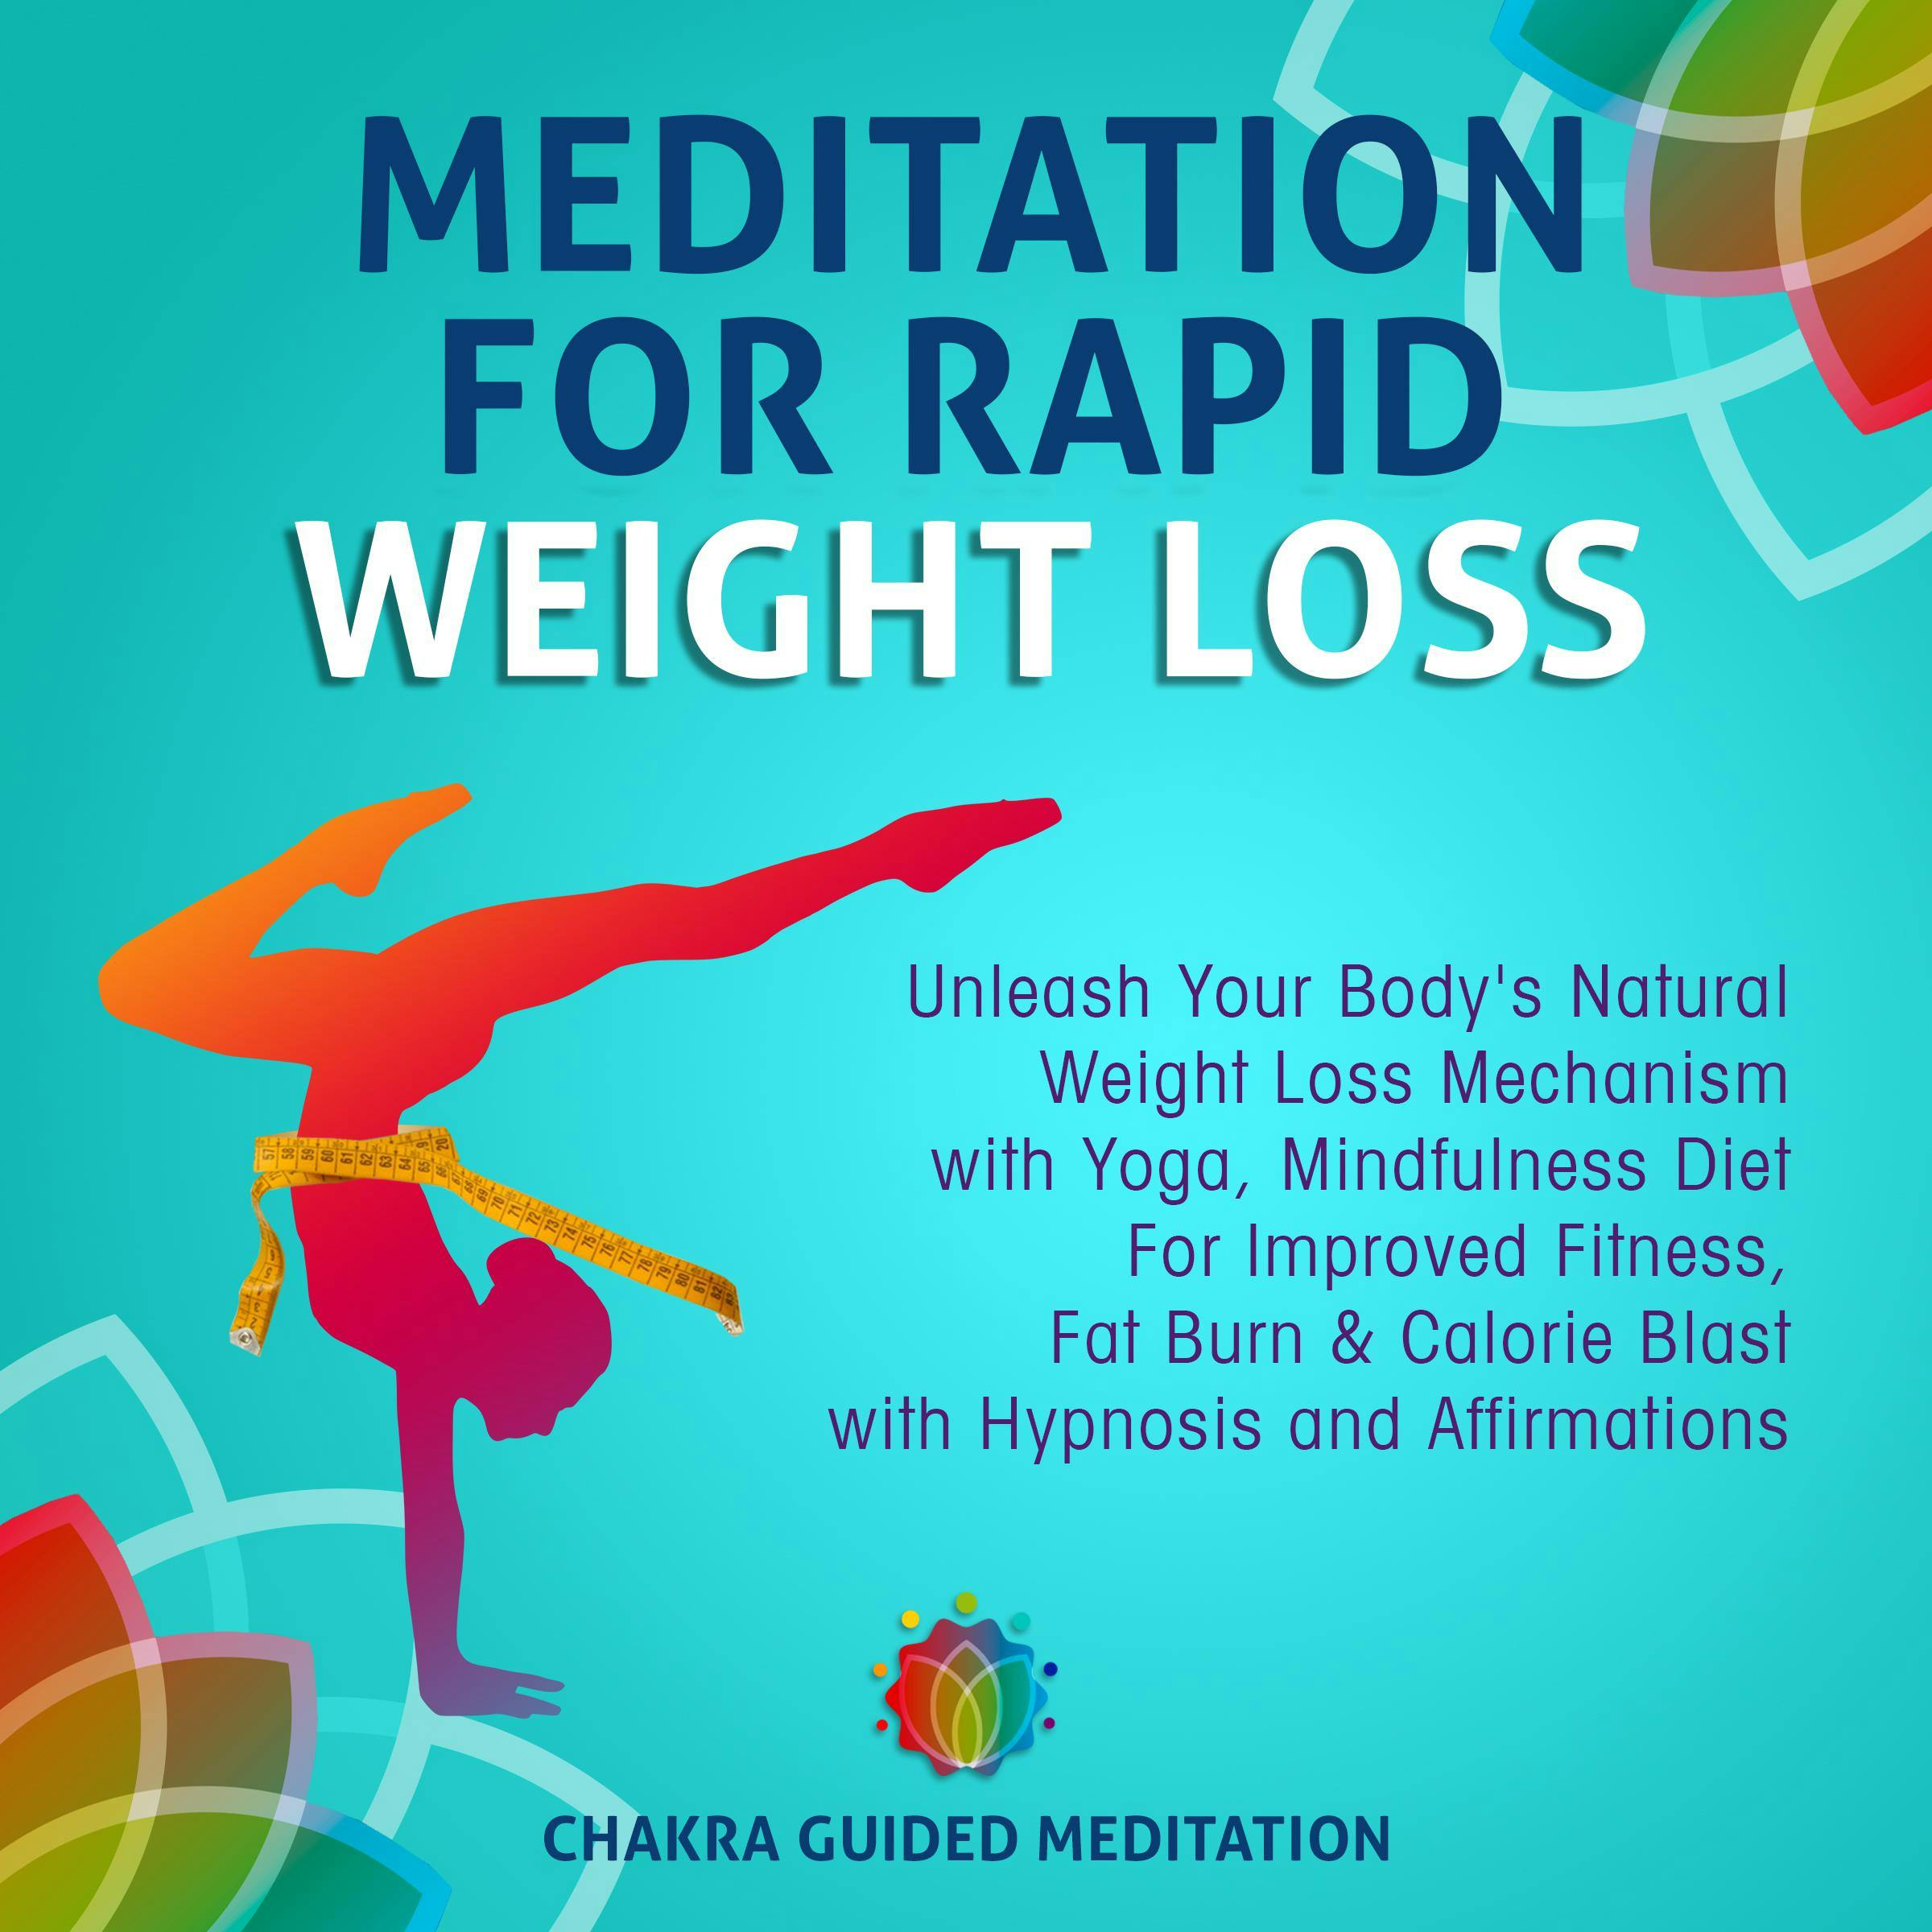 Meditation For Rapid Weight Loss: Unleash Your Body's Natural Weight Loss Mechanism with Yoga, Mindfulness Diet For Improved Fitness, Fat Burn & Calorie Blast with Hypnosis and Affirmations - Chakra Guided Meditation